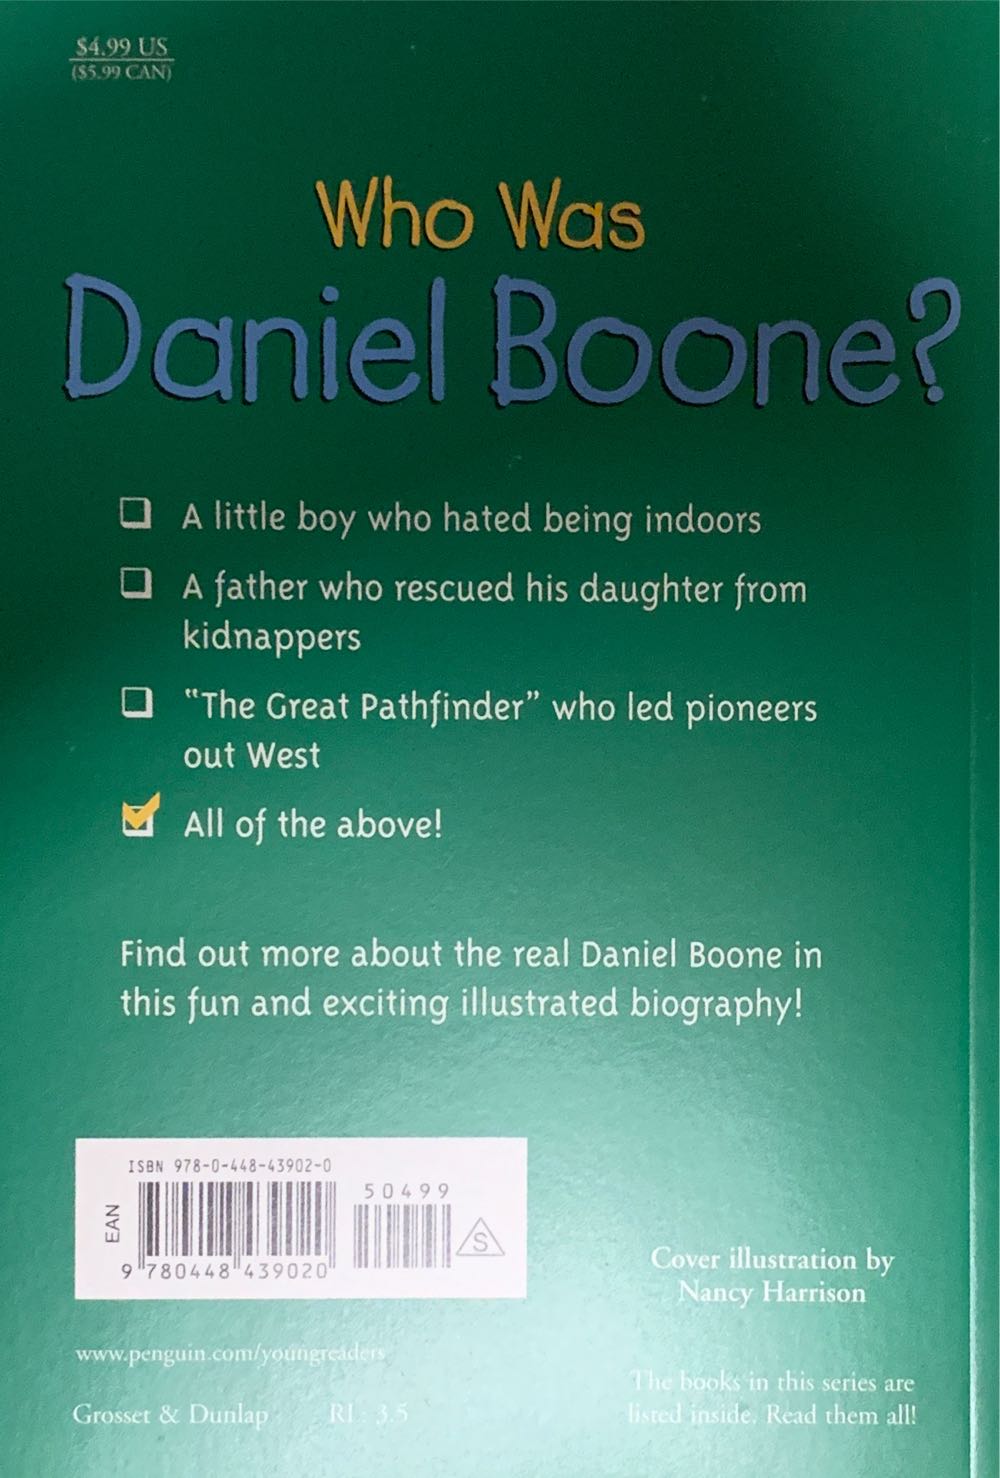 Who Was Daniel Boone? - George Ulrich (Penguin - Paperback) book collectible [Barcode 9780448439020] - Main Image 2